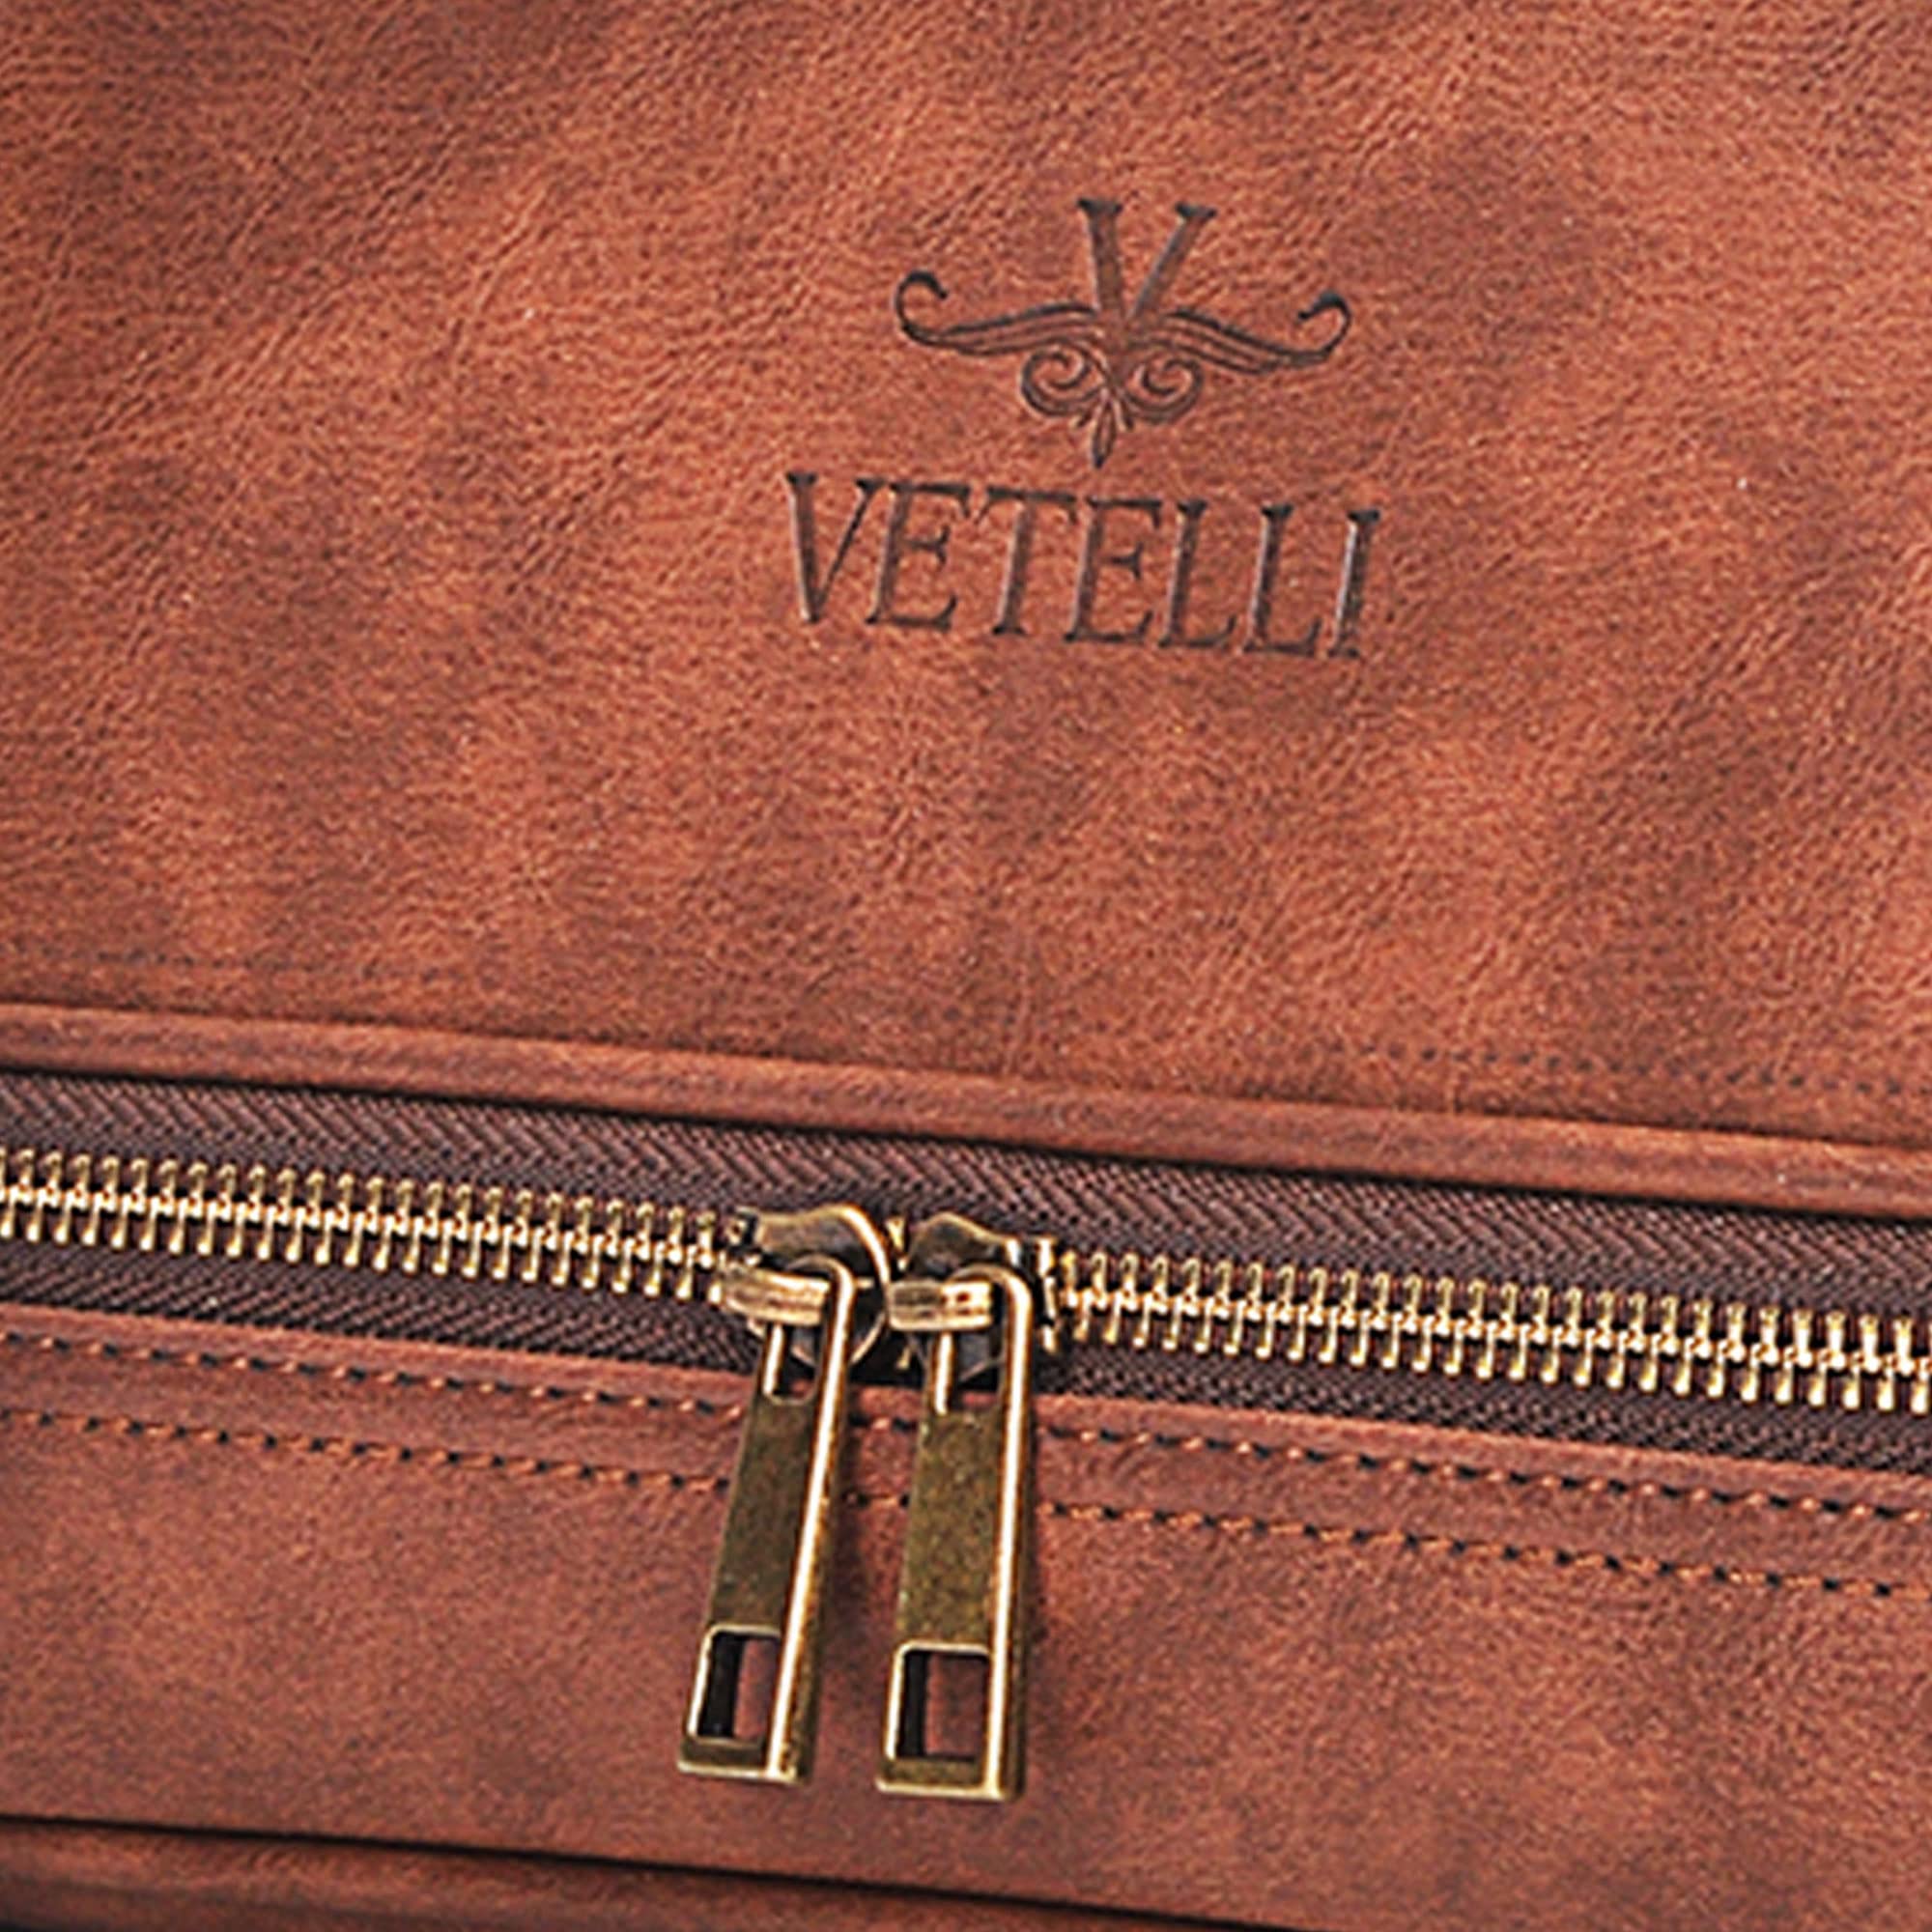 Vetell Classic Men's Leather Toiletry Bag and Dopp Kit with Upper and Lower Zippered Compartments, 2 Mesh Bottle Pouches, and Carrying Handle - The Best Gift for Men.